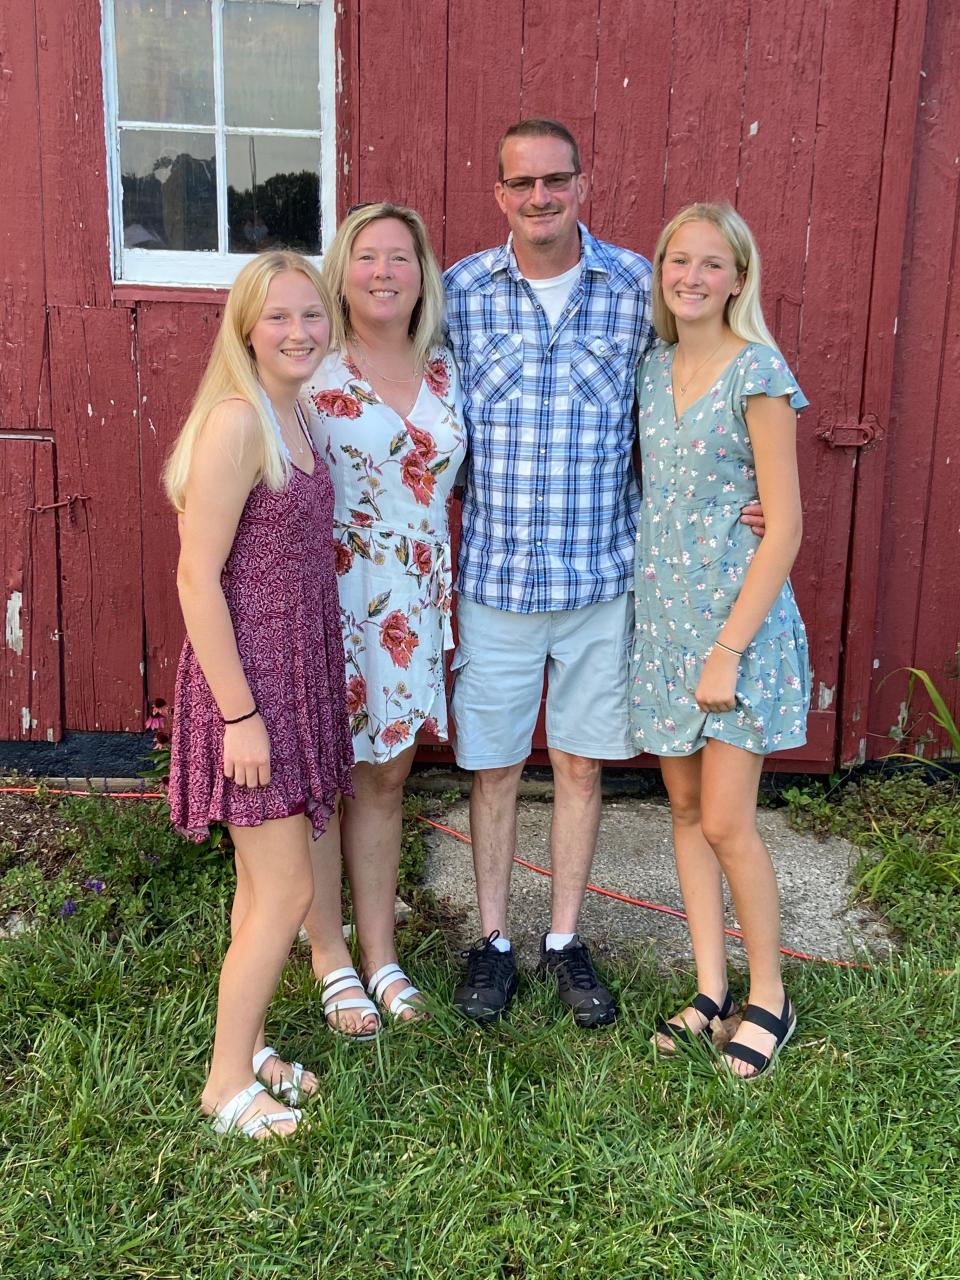 The Alcock family of Sand Creek — from left, Mekeal, Jennifer, Kory and Kaitlyn — are pictured.